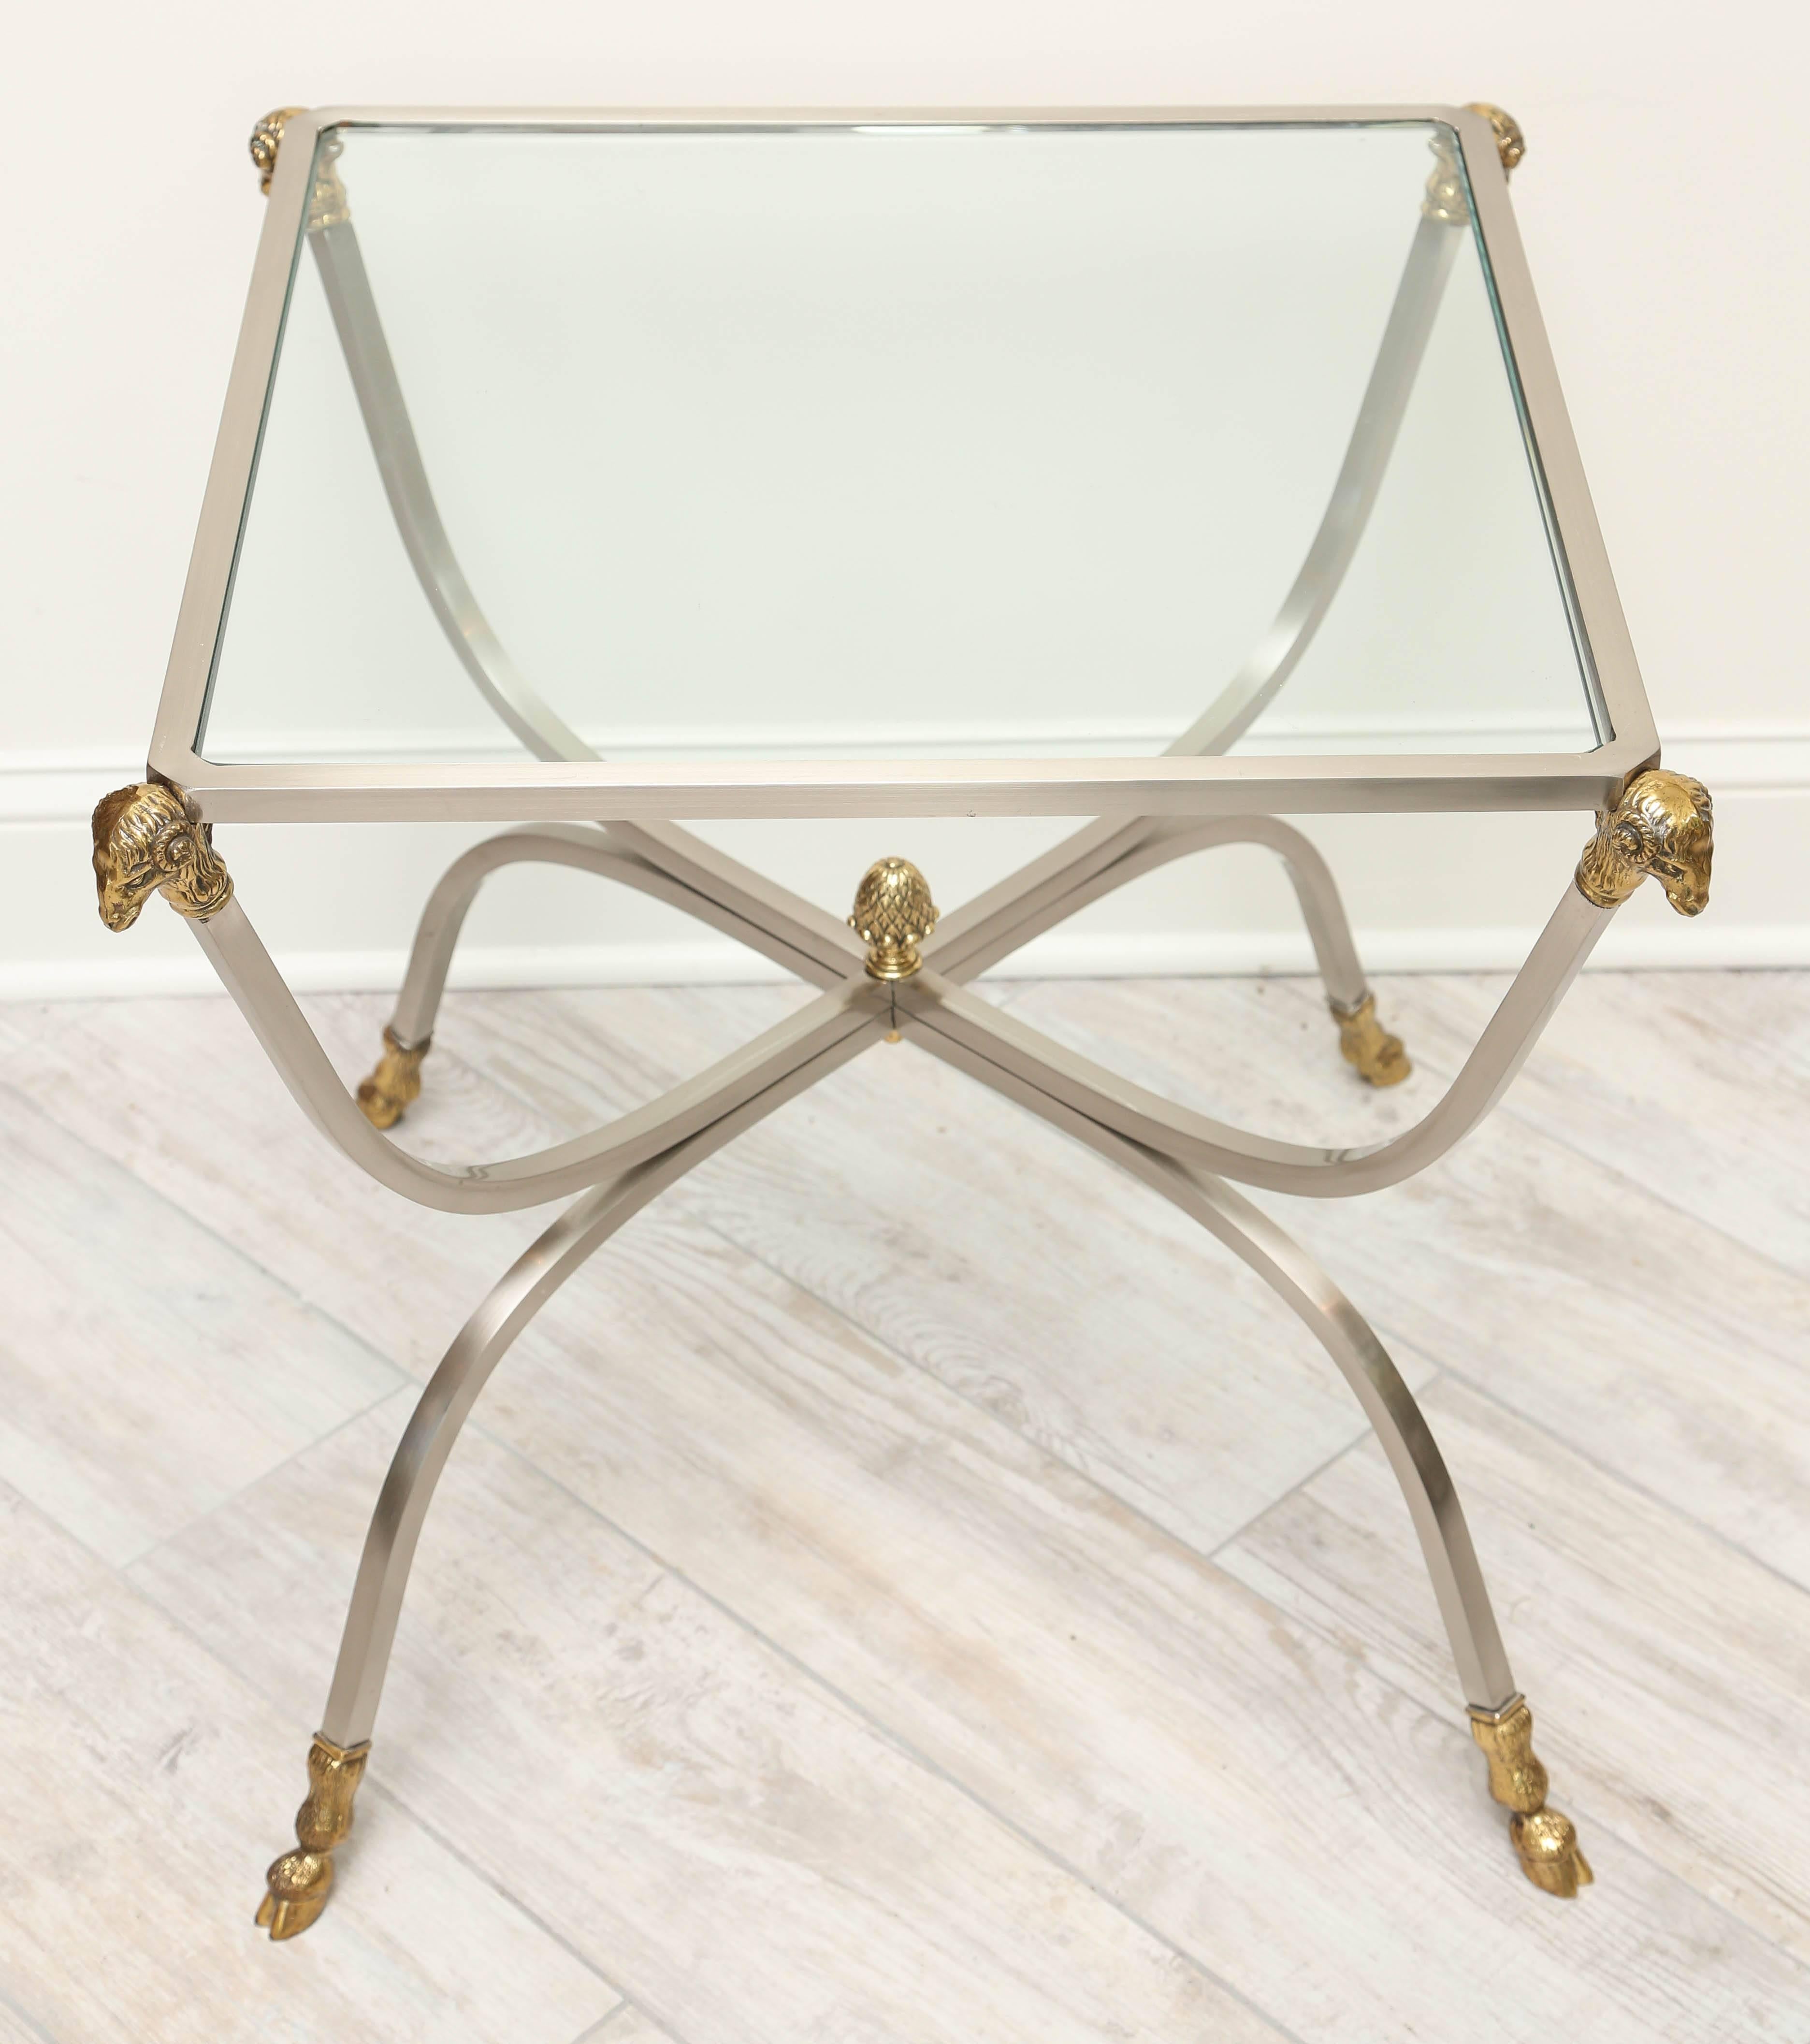 Classical pair of steel and brass glass topped side tables with ram's heads in each corner and hoofed feet.